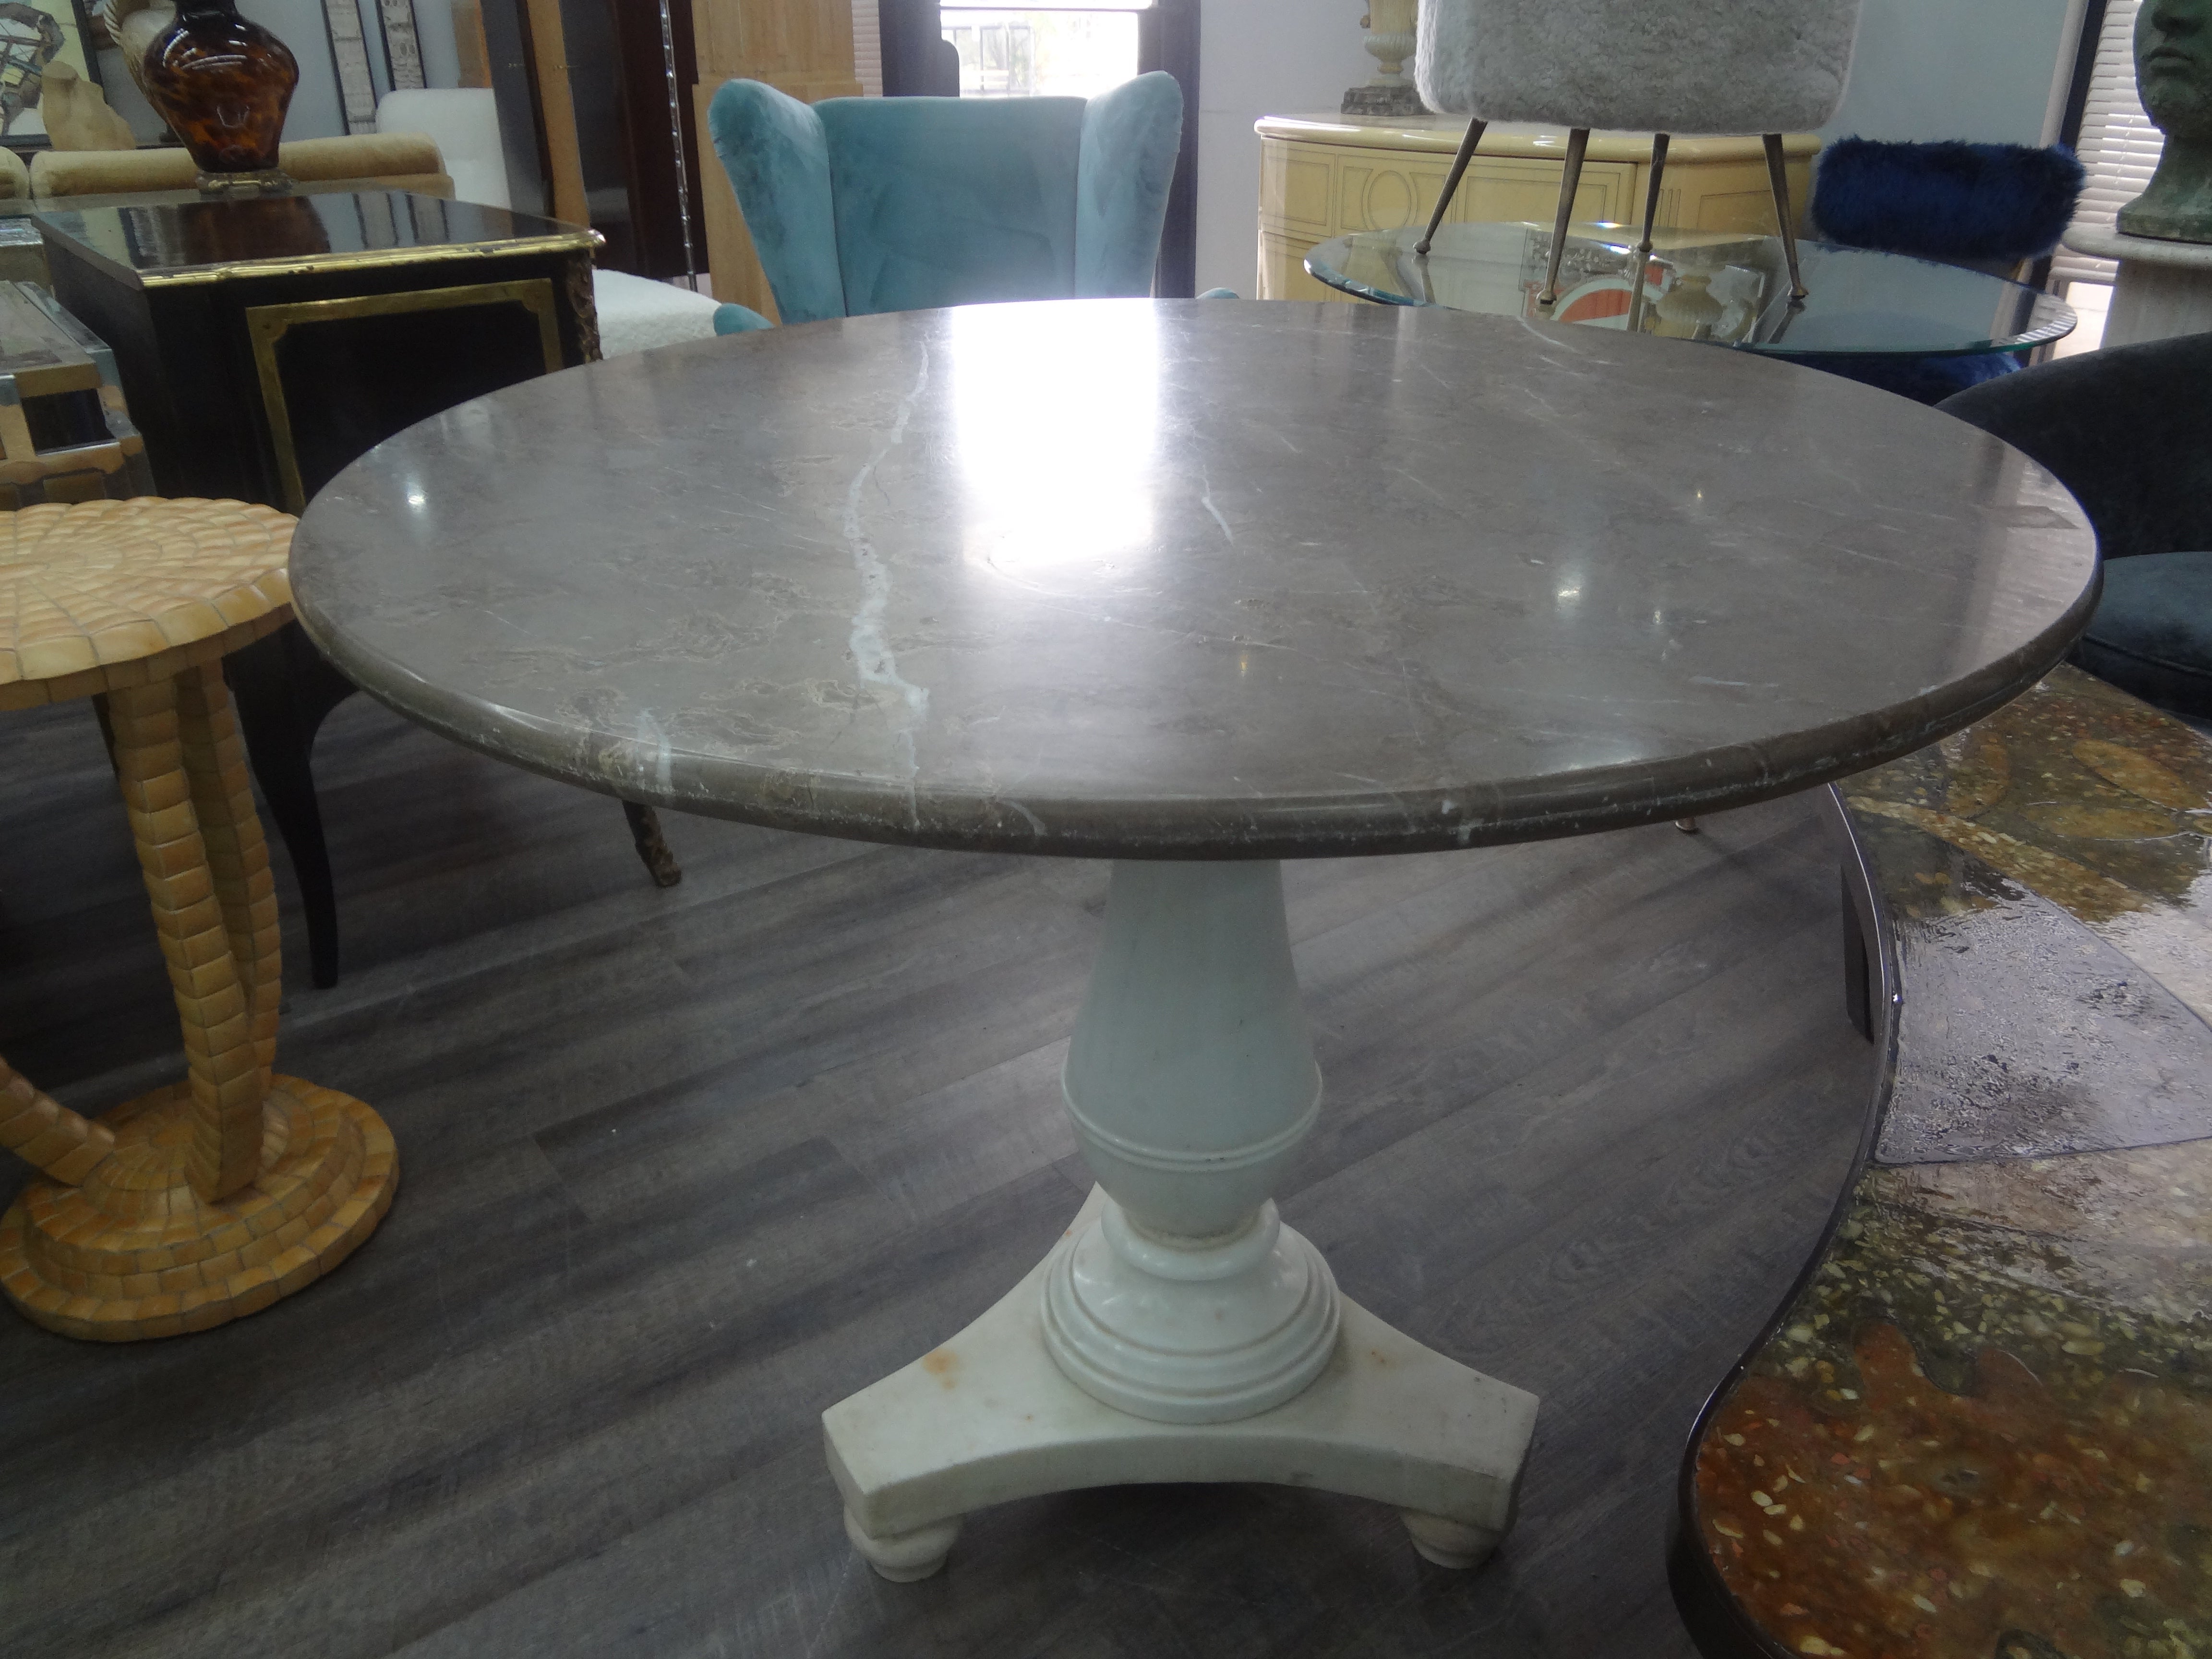 18th Century Italian Marble Center Table.
This stunning 18th century Italian marble table, center table or dining table has a Carrara marble base and a beautiful contrasting marble top on a tripod pedestal base.
Our versatile table can be used in